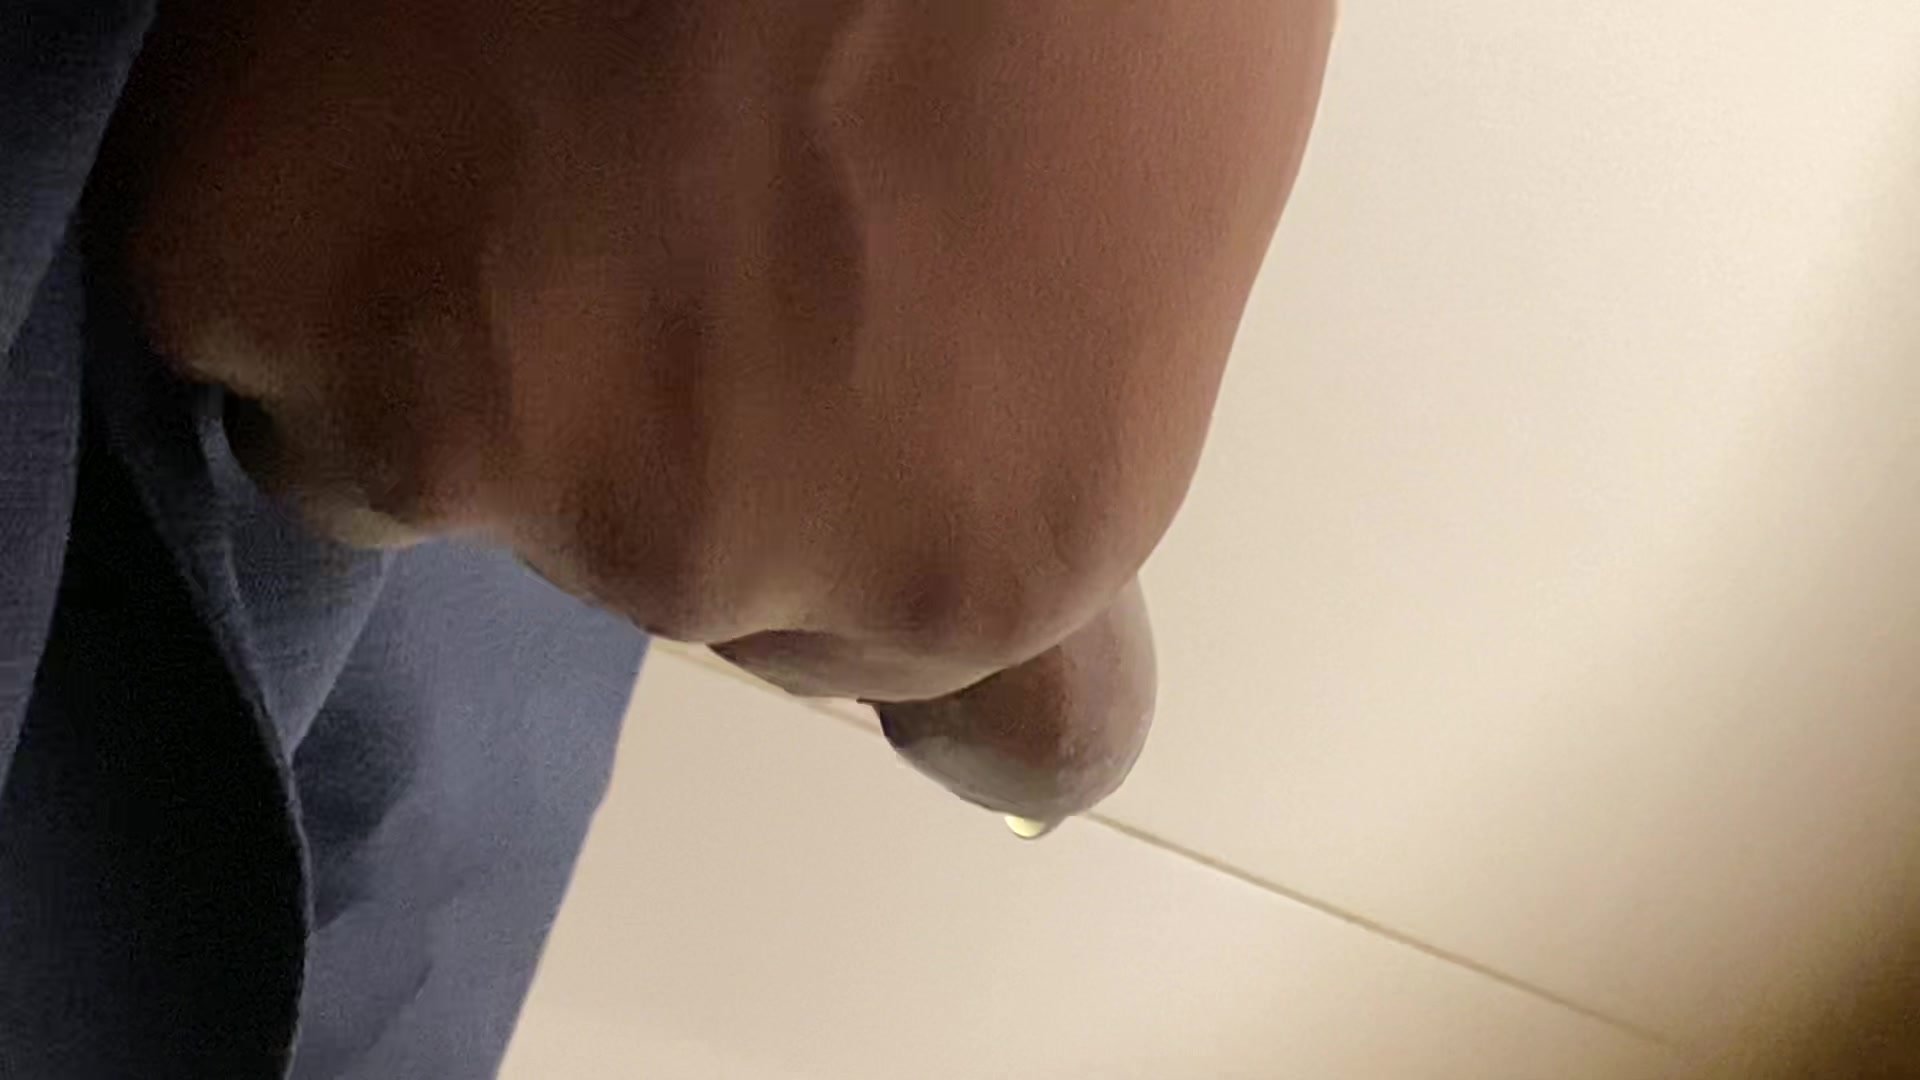 Daddy's black uncut pissing cock